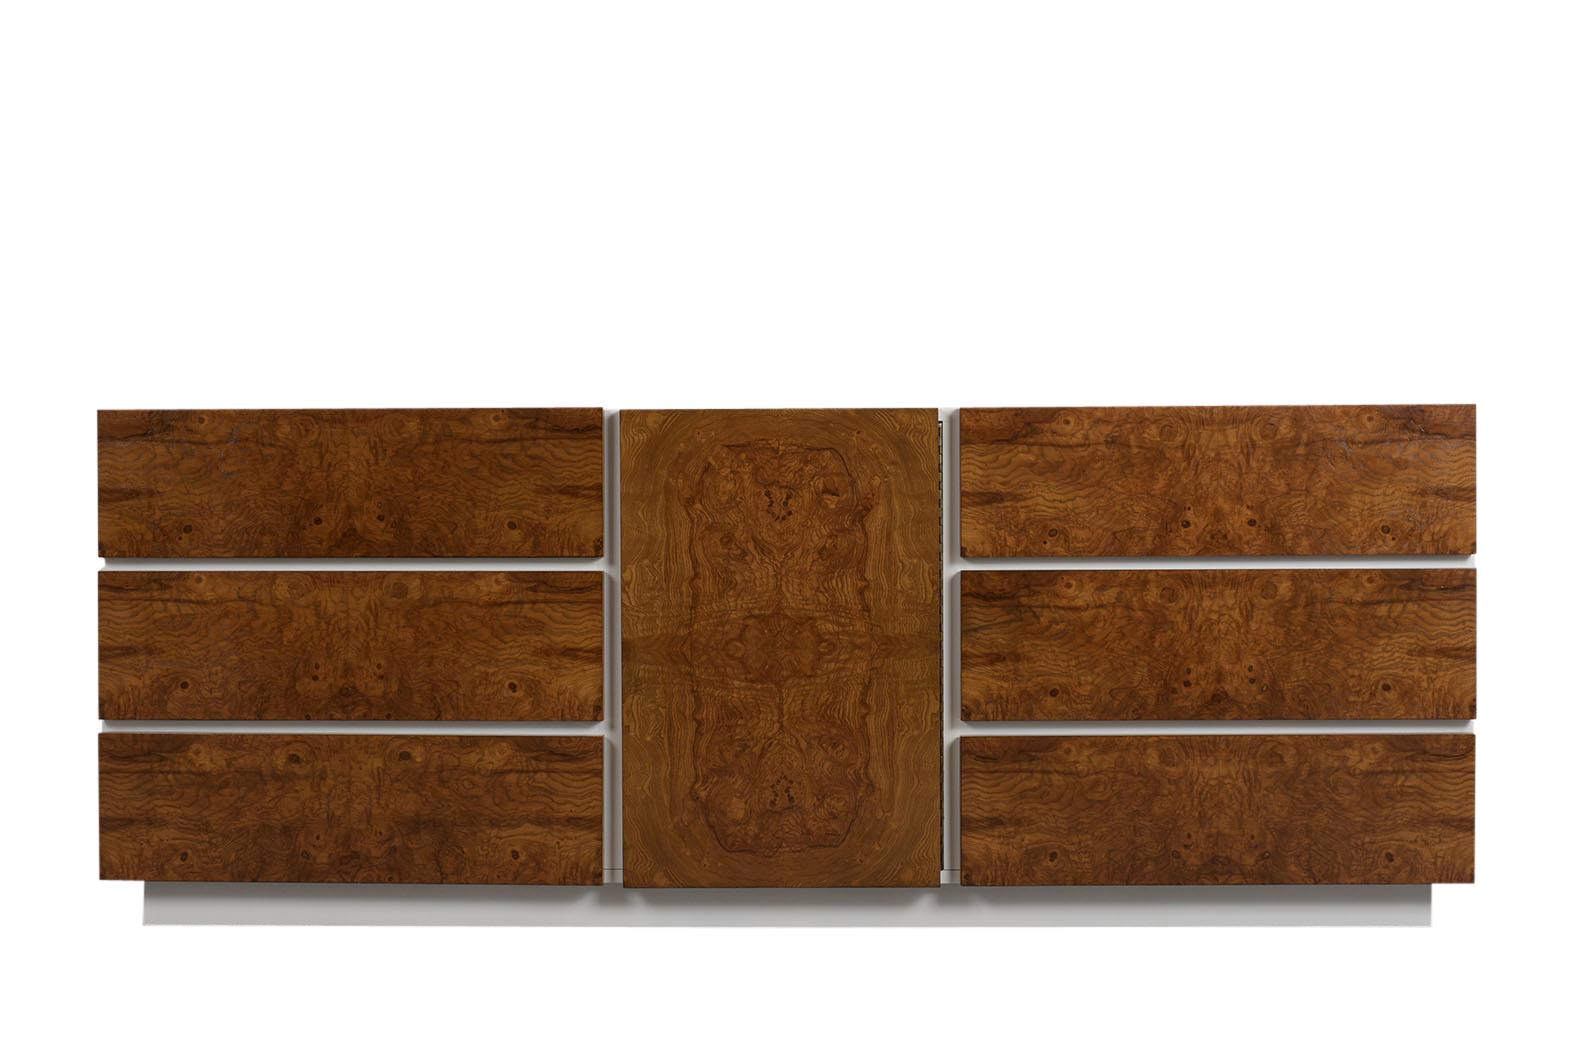 This 1960s mid-century burled elm sideboard has been professionally restored and is stained in a walnut and white color combination with a newly lacquered finish. The dresser comes with three large drawers on each side and a center door with three